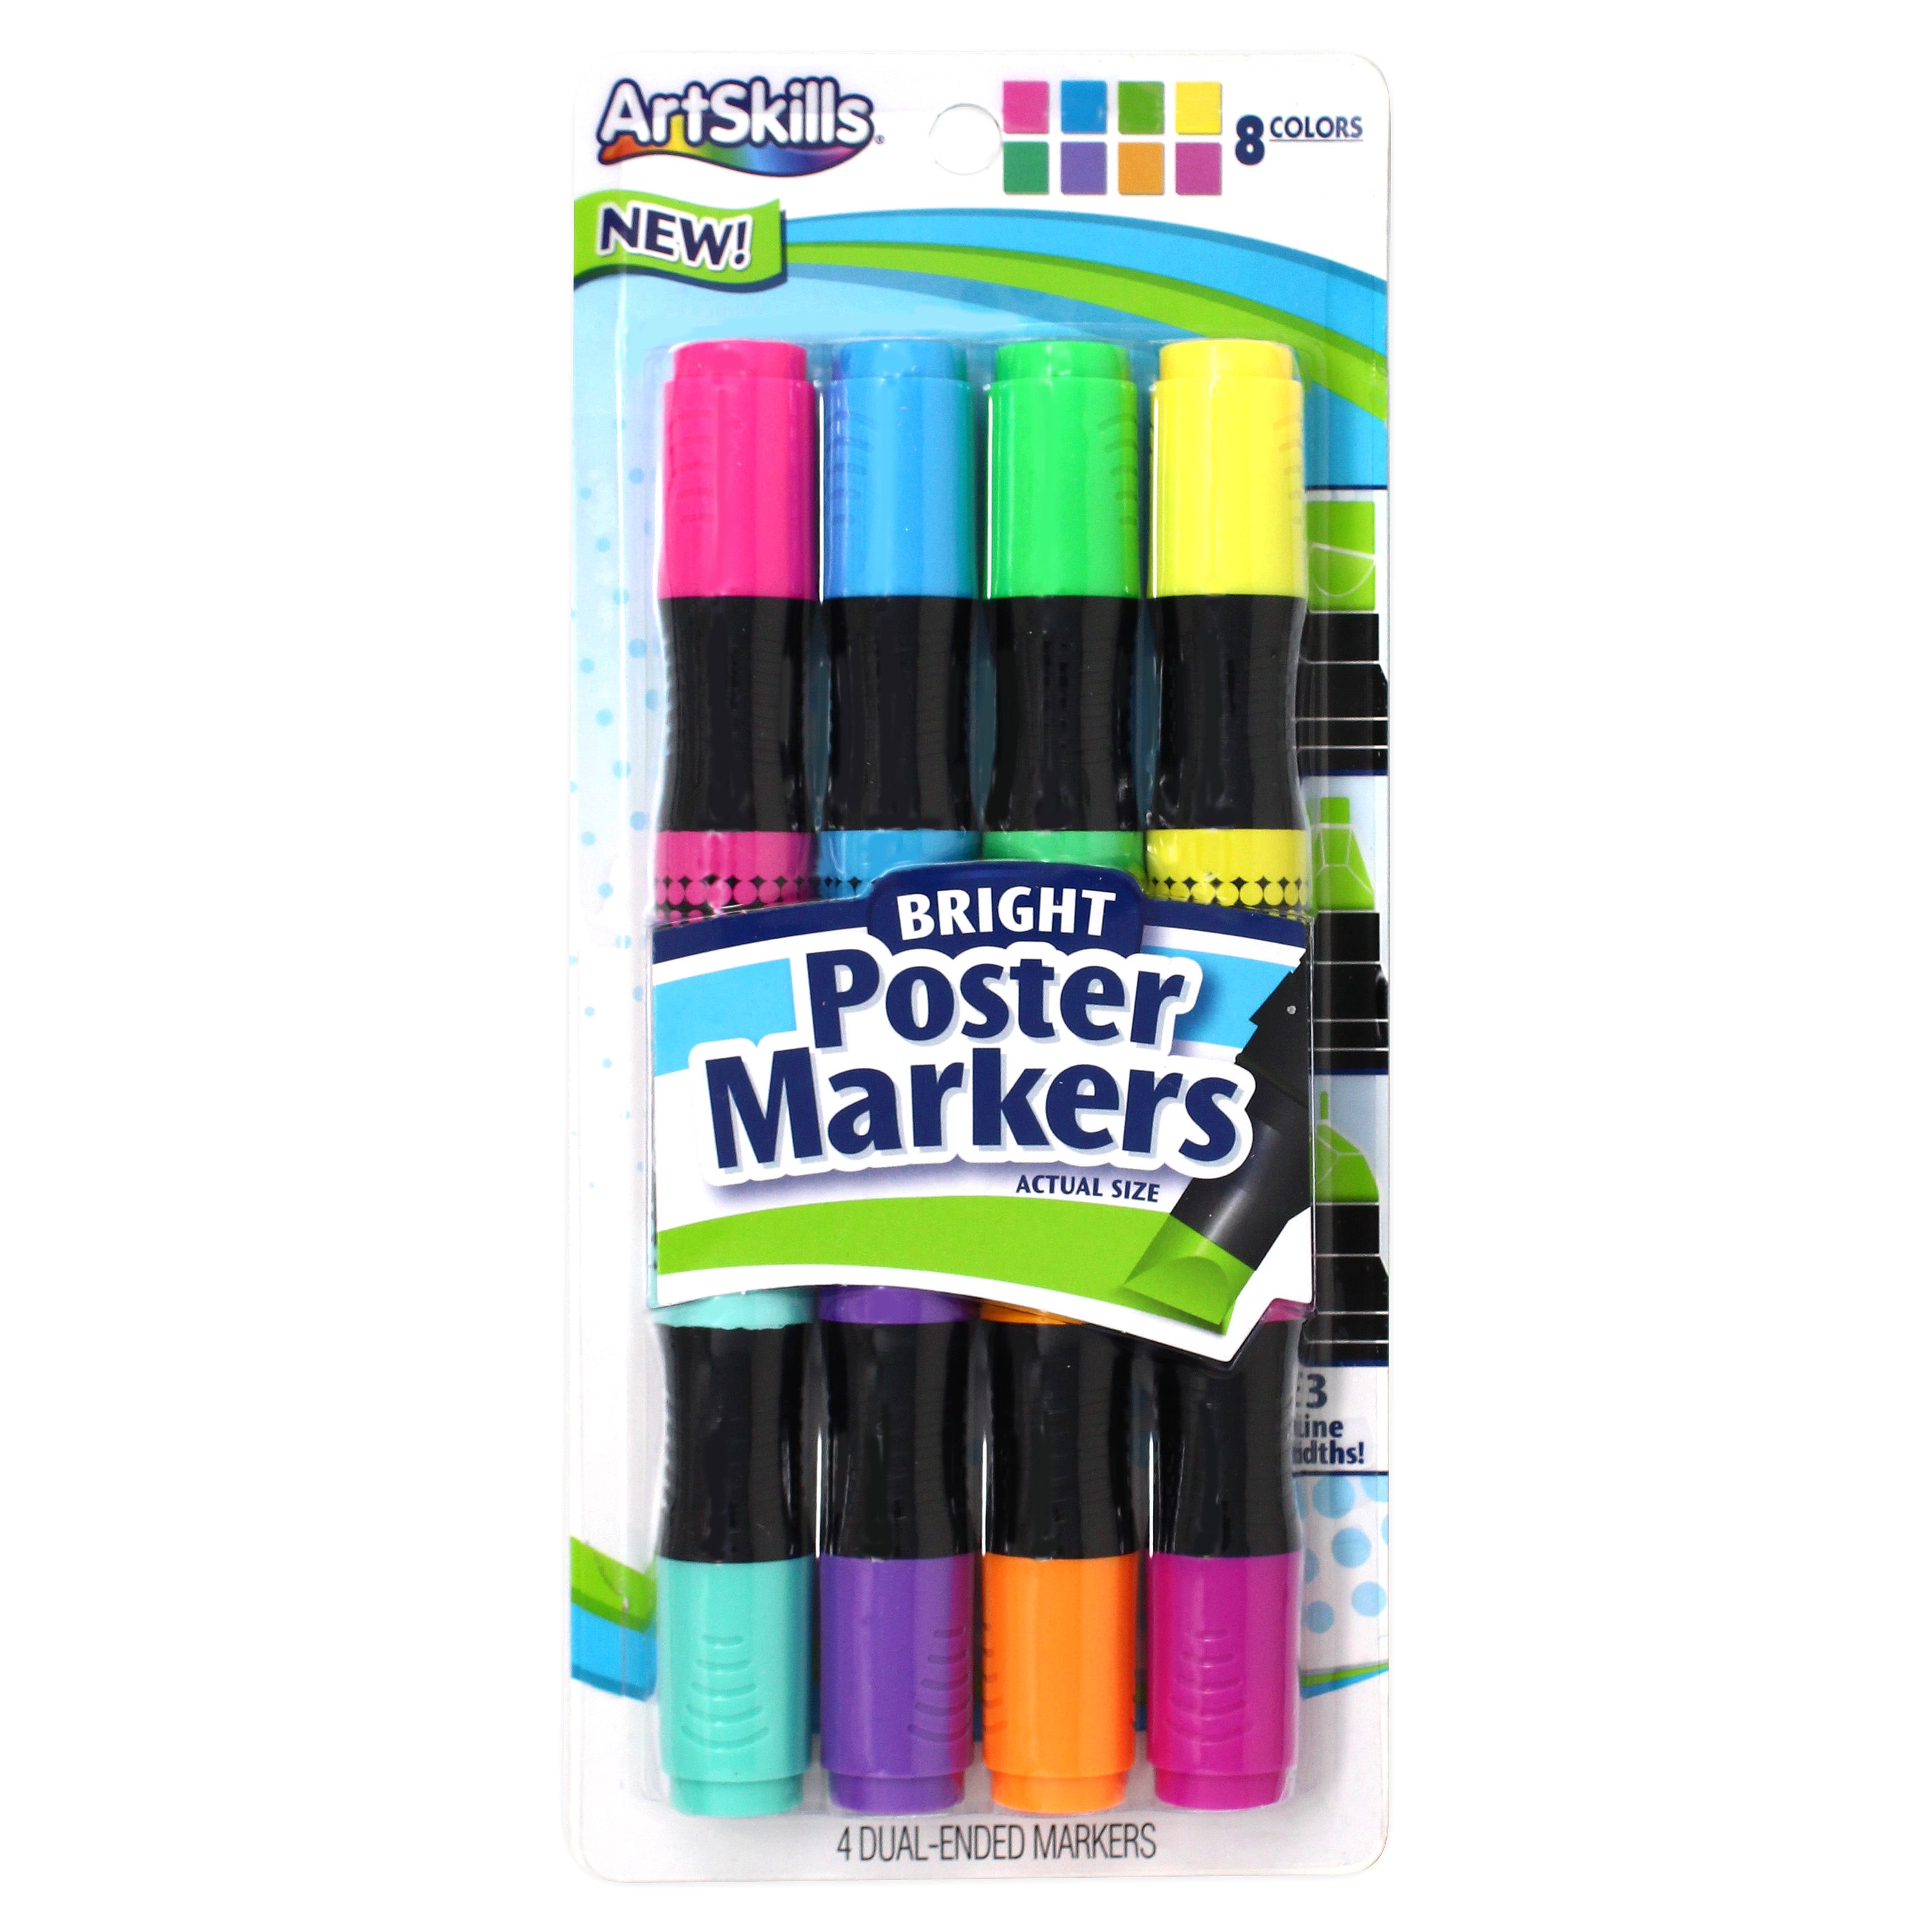 ArtSkills Bright Double-Ended Poster Markers